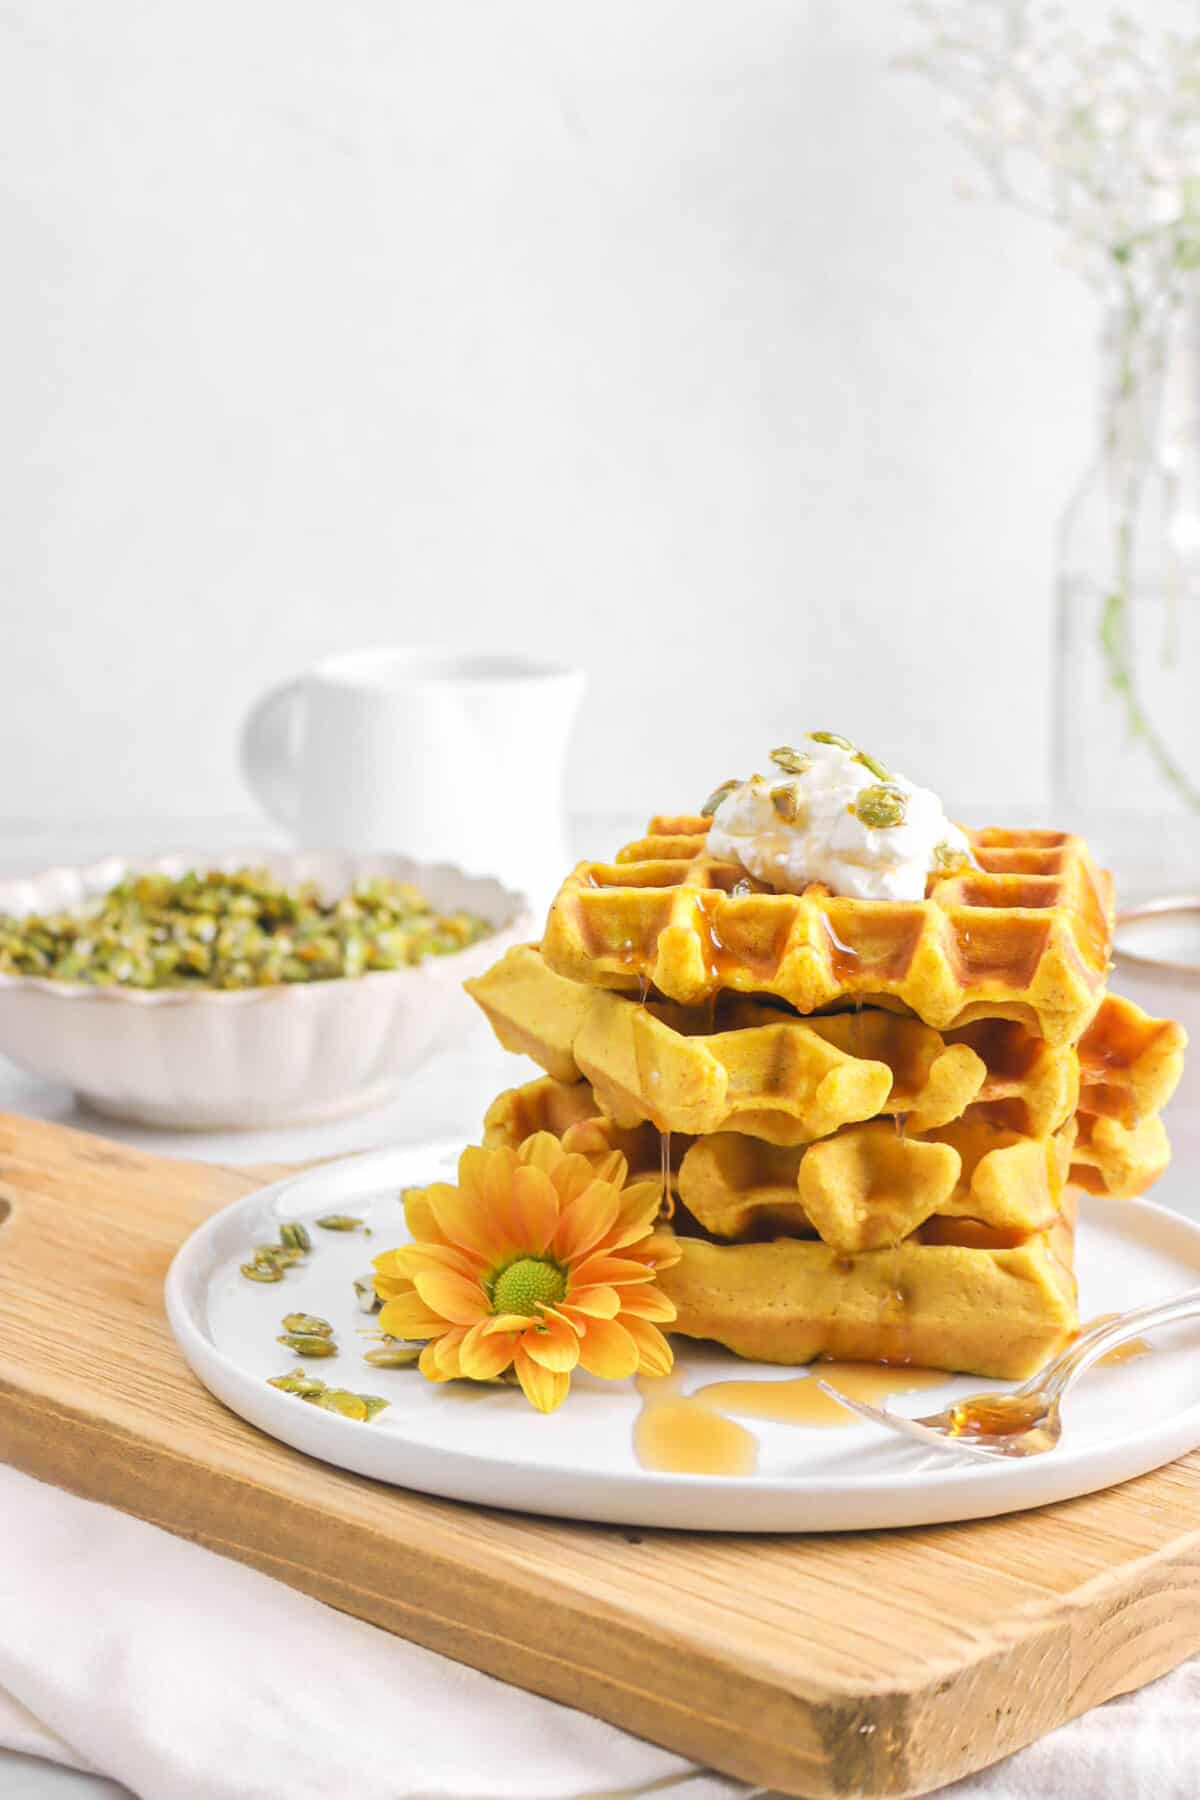 waffles stacked with maple syrup dripping, candied pepitas, with whipped cream on top, and flowers